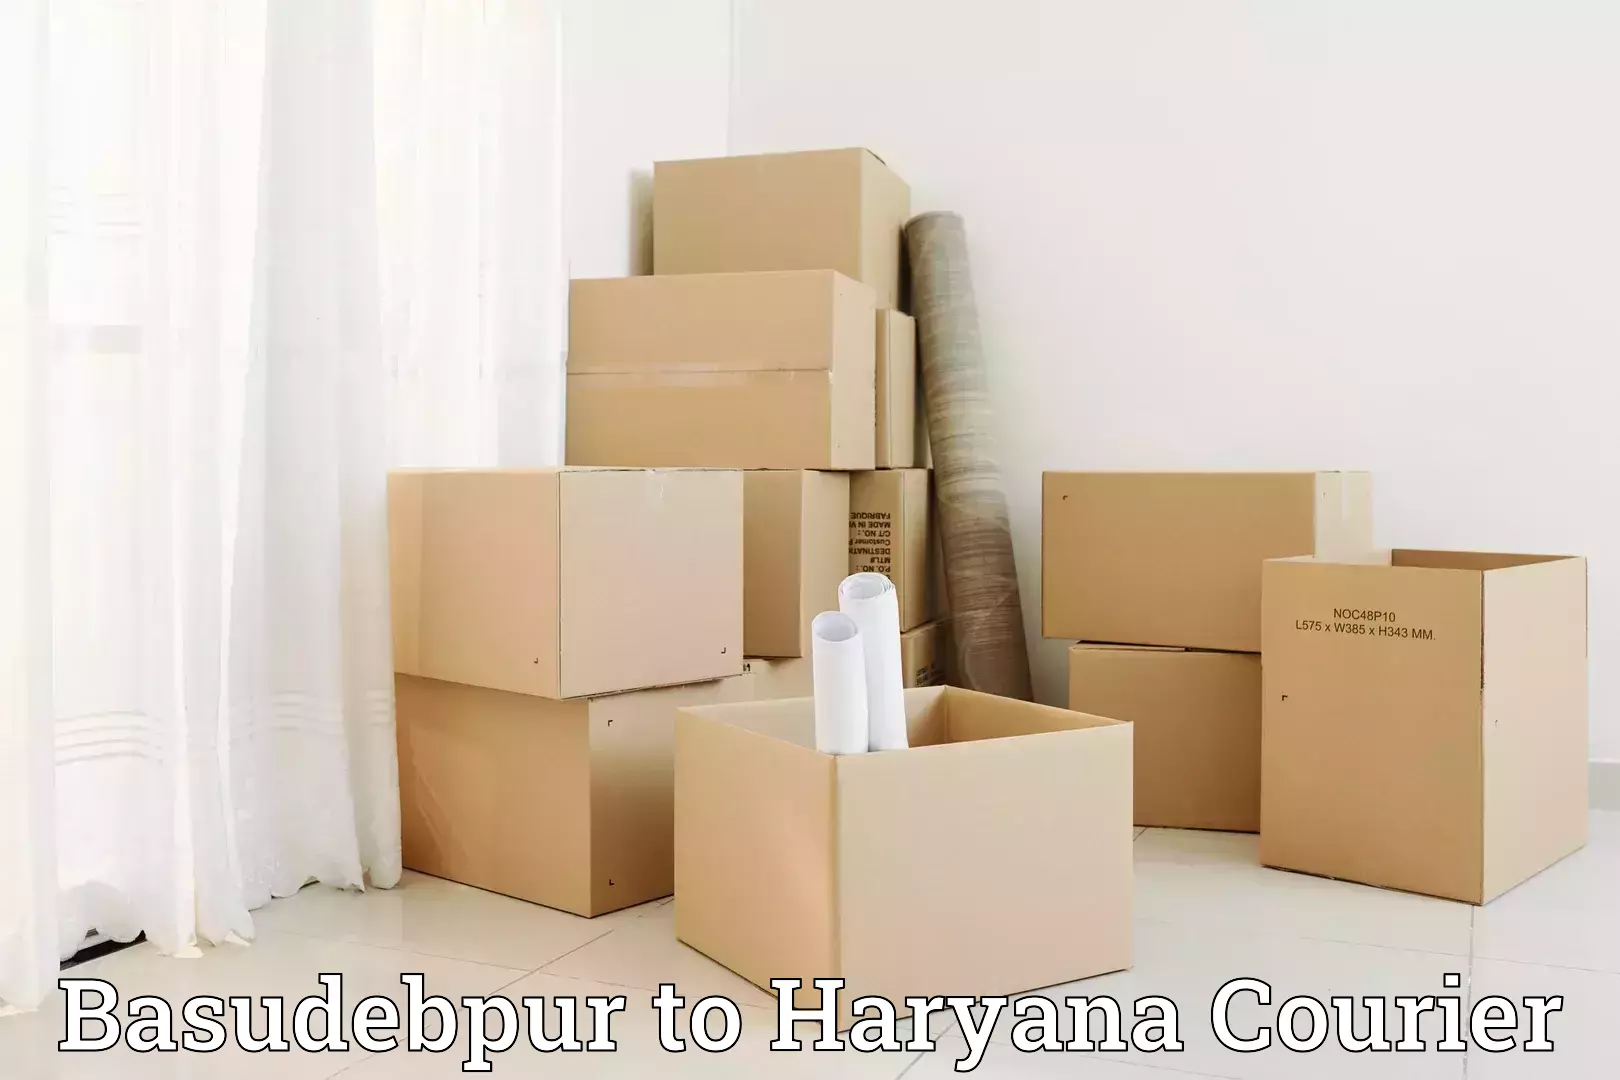 Efficient packing and moving Basudebpur to NCR Haryana